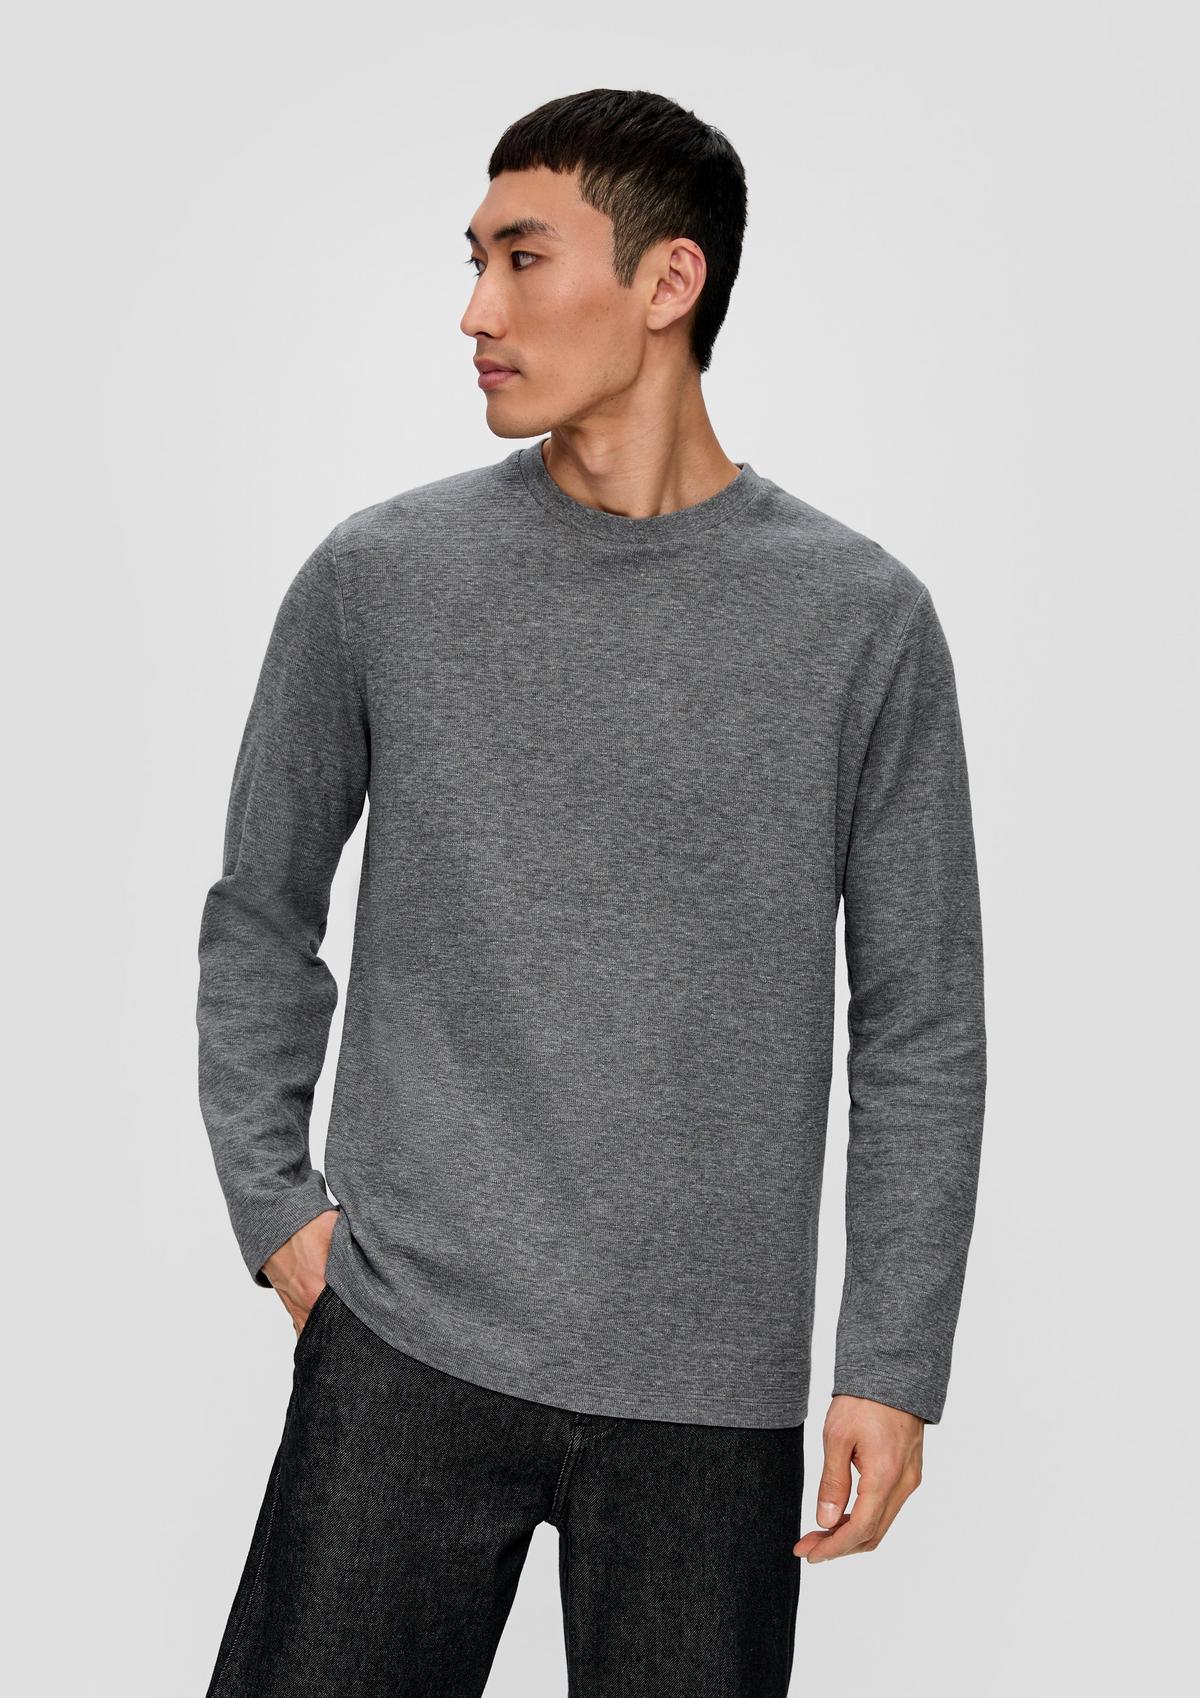 Long sleeve top with a crew neck